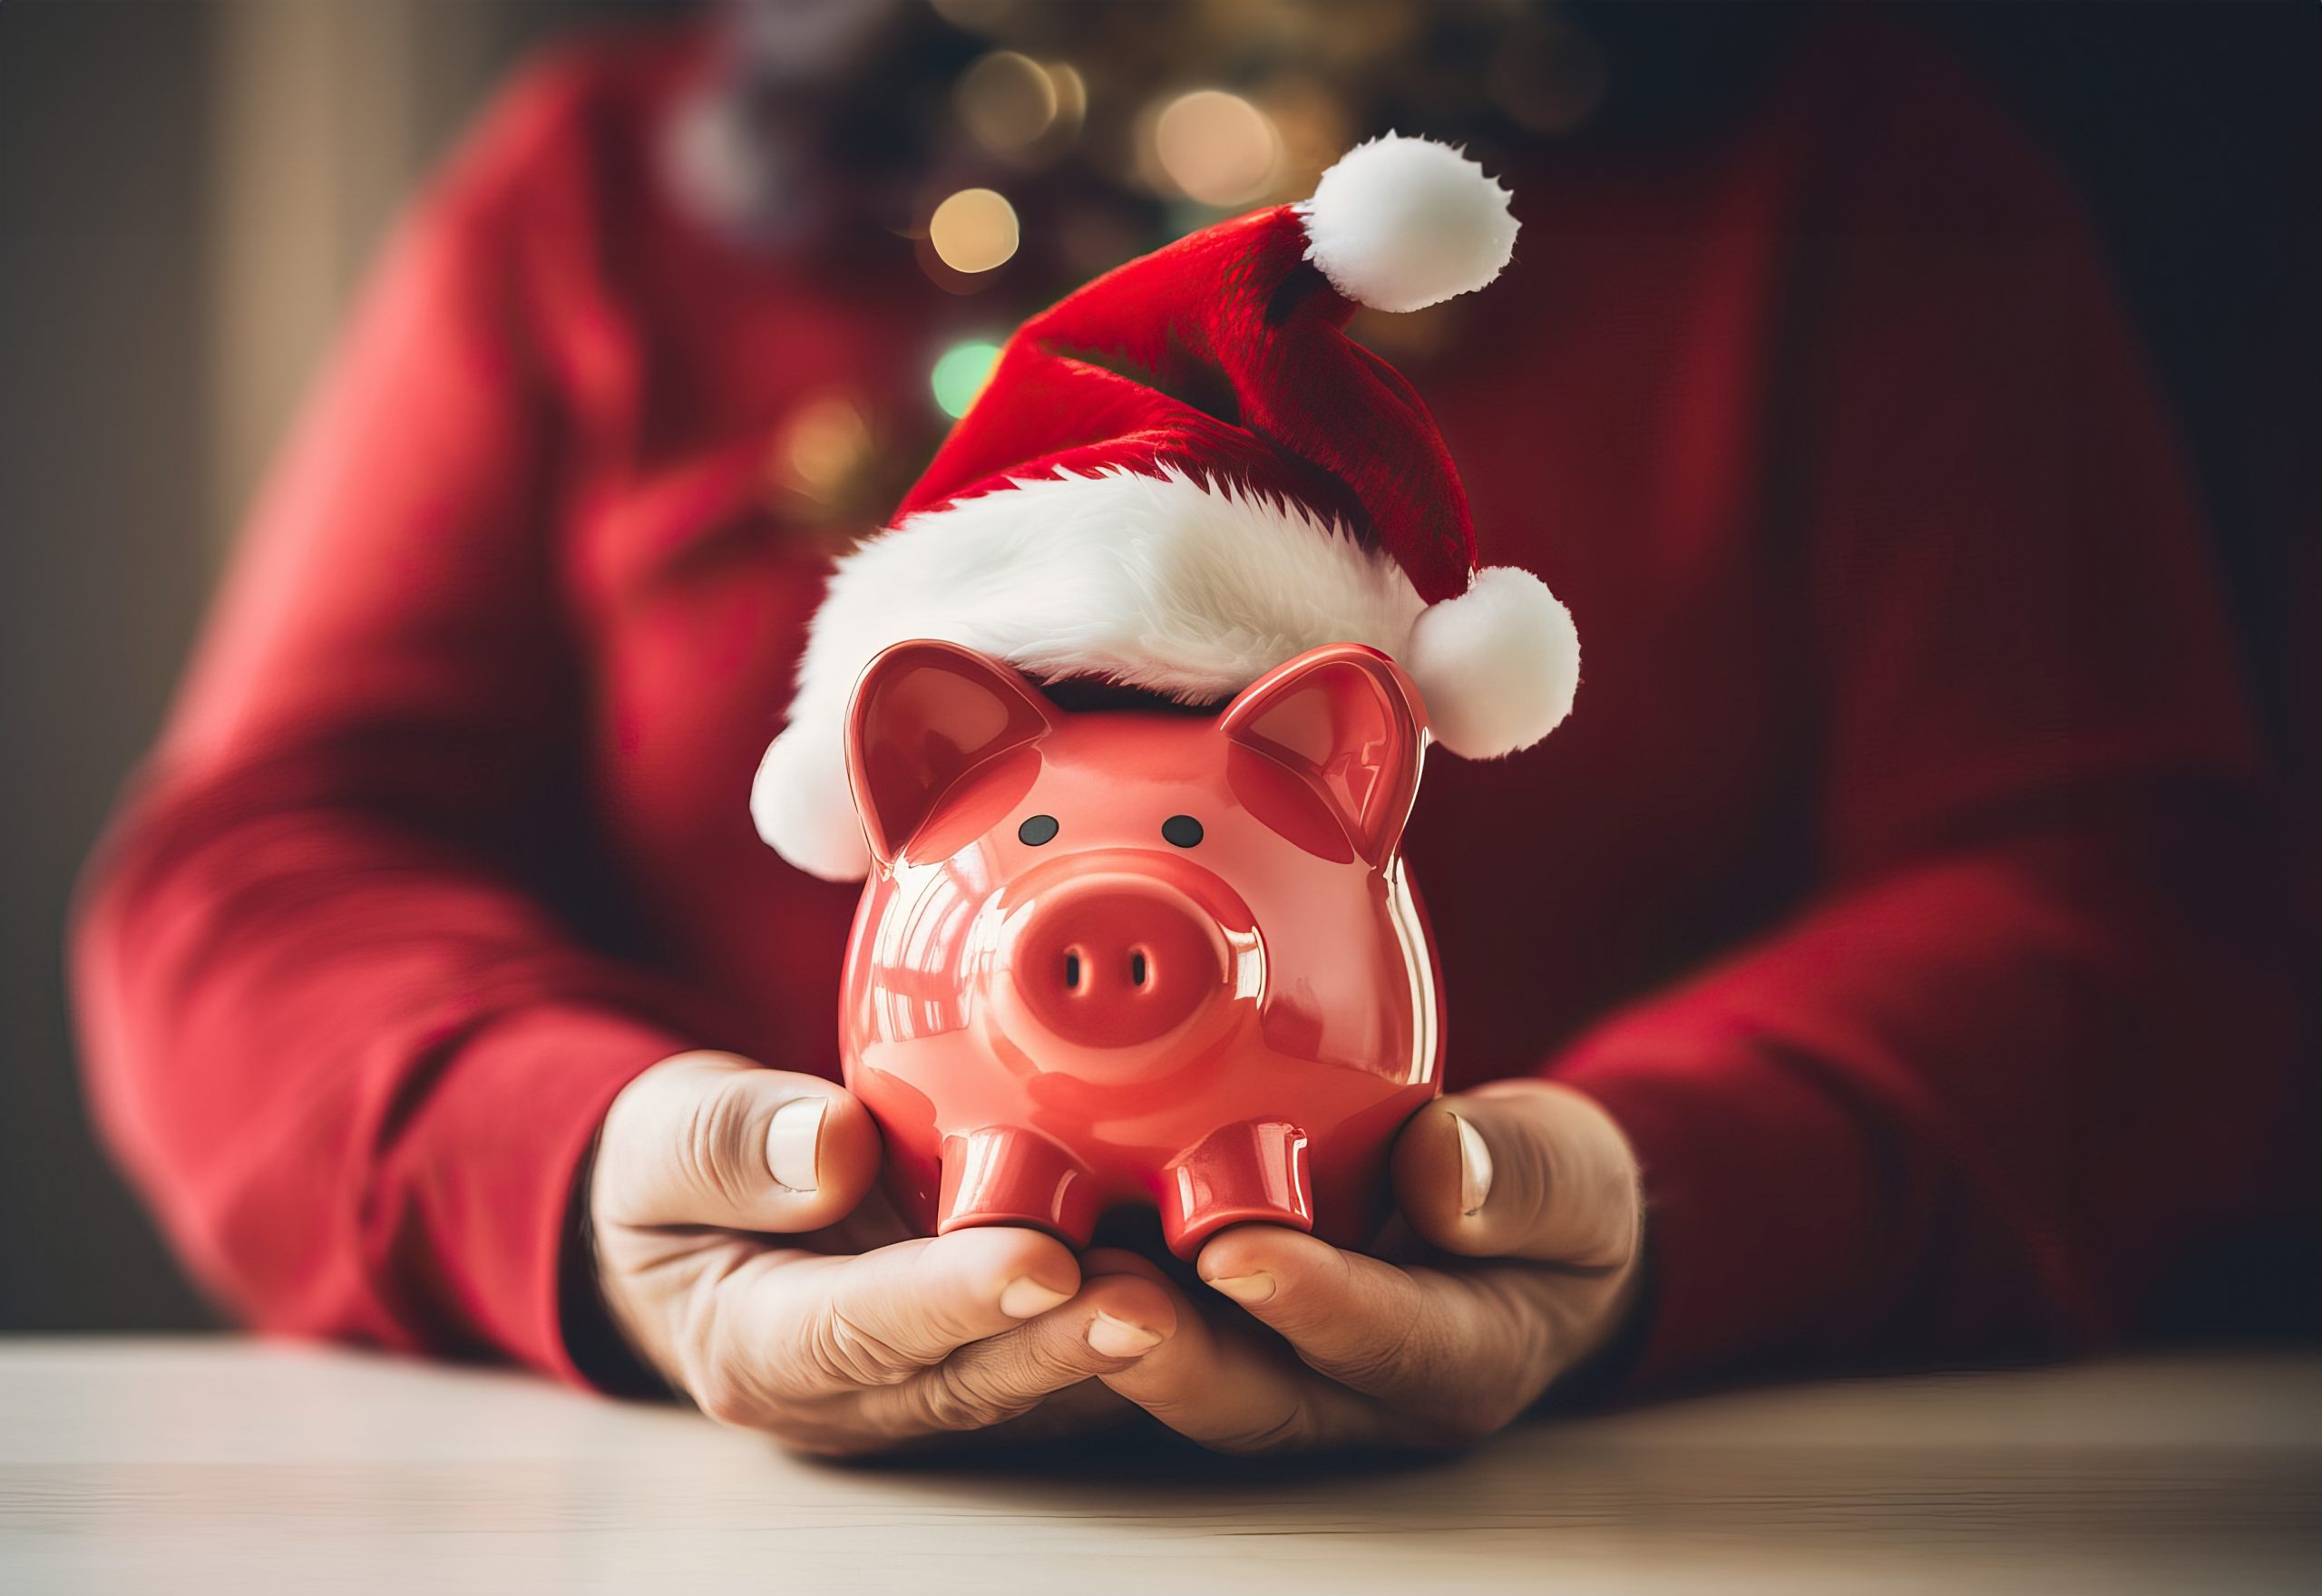 A person in a Santa hat holding a piggy bank, spreading holiday cheer and saving for the season